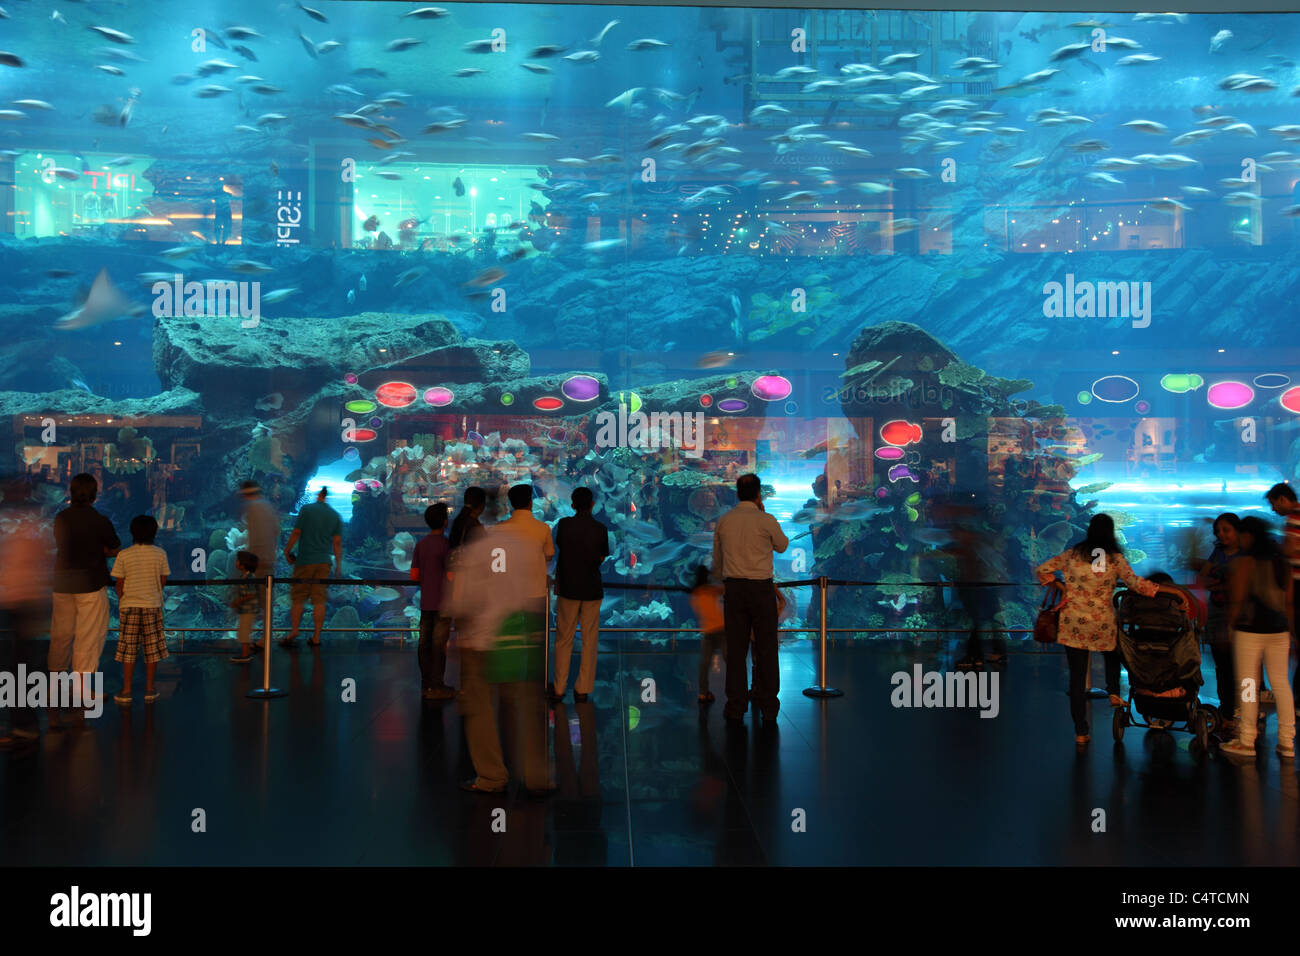 People in front of the aquarium inside of Dubai Mall Stock Photo